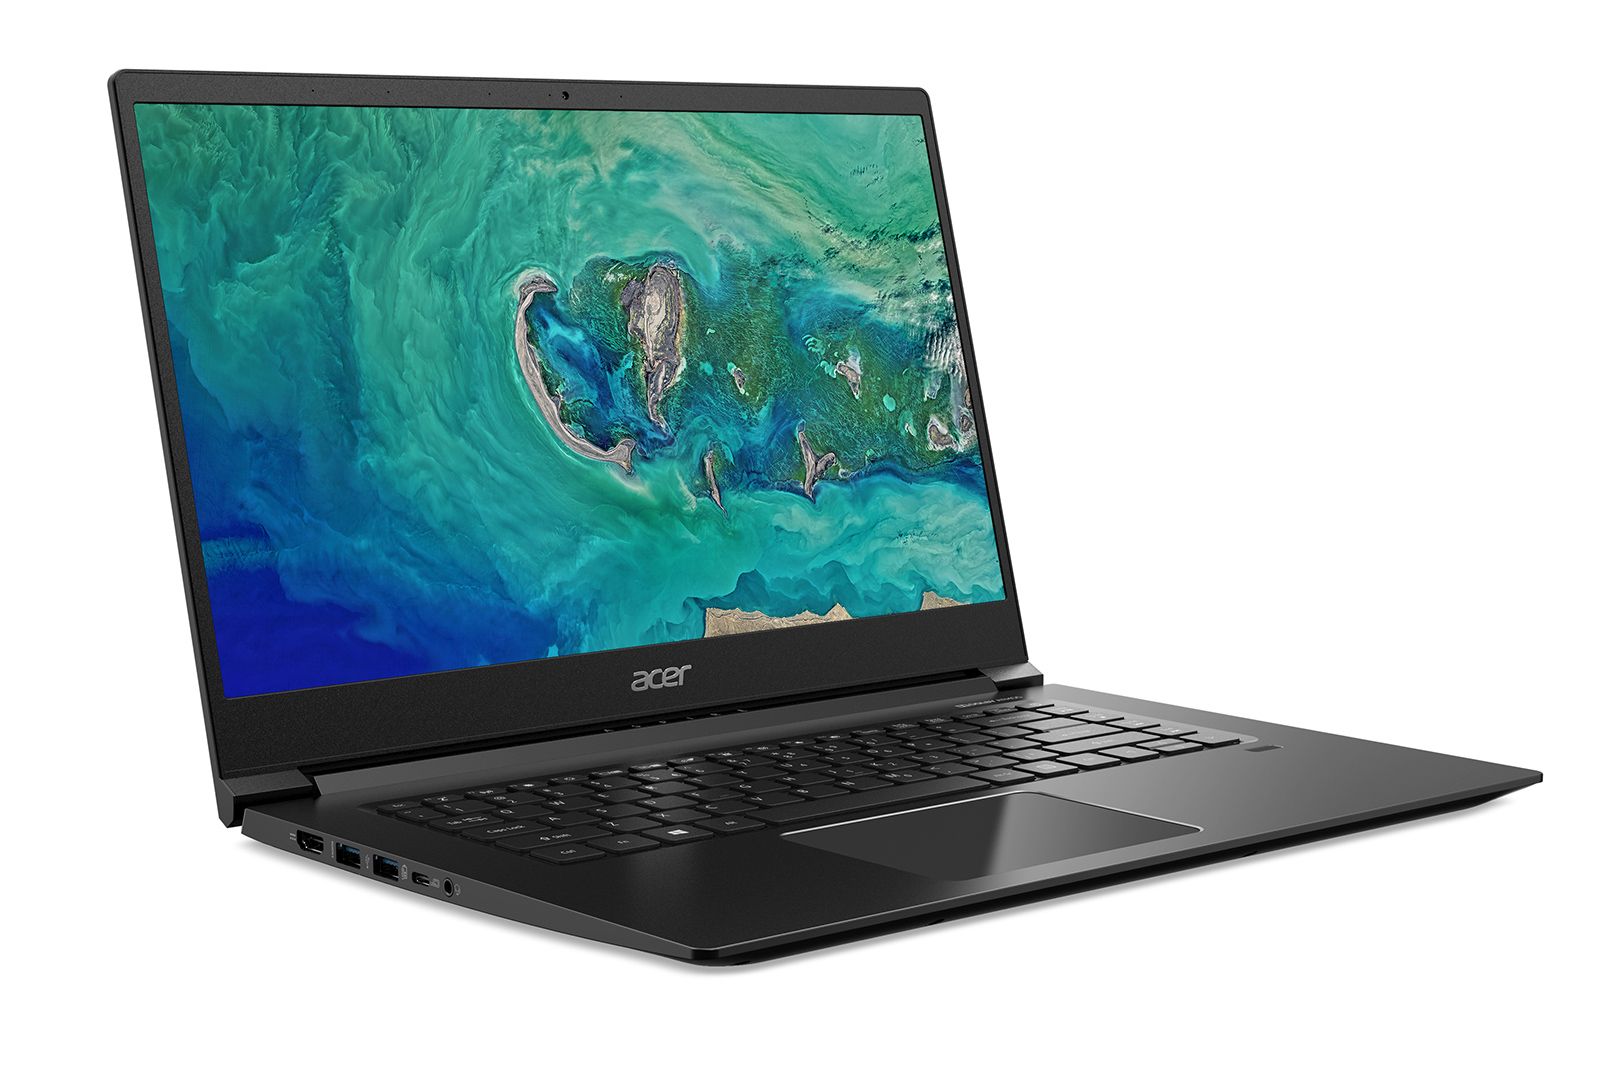 Acer’s Aspire line-up offers a laptop for just about everyone image 1